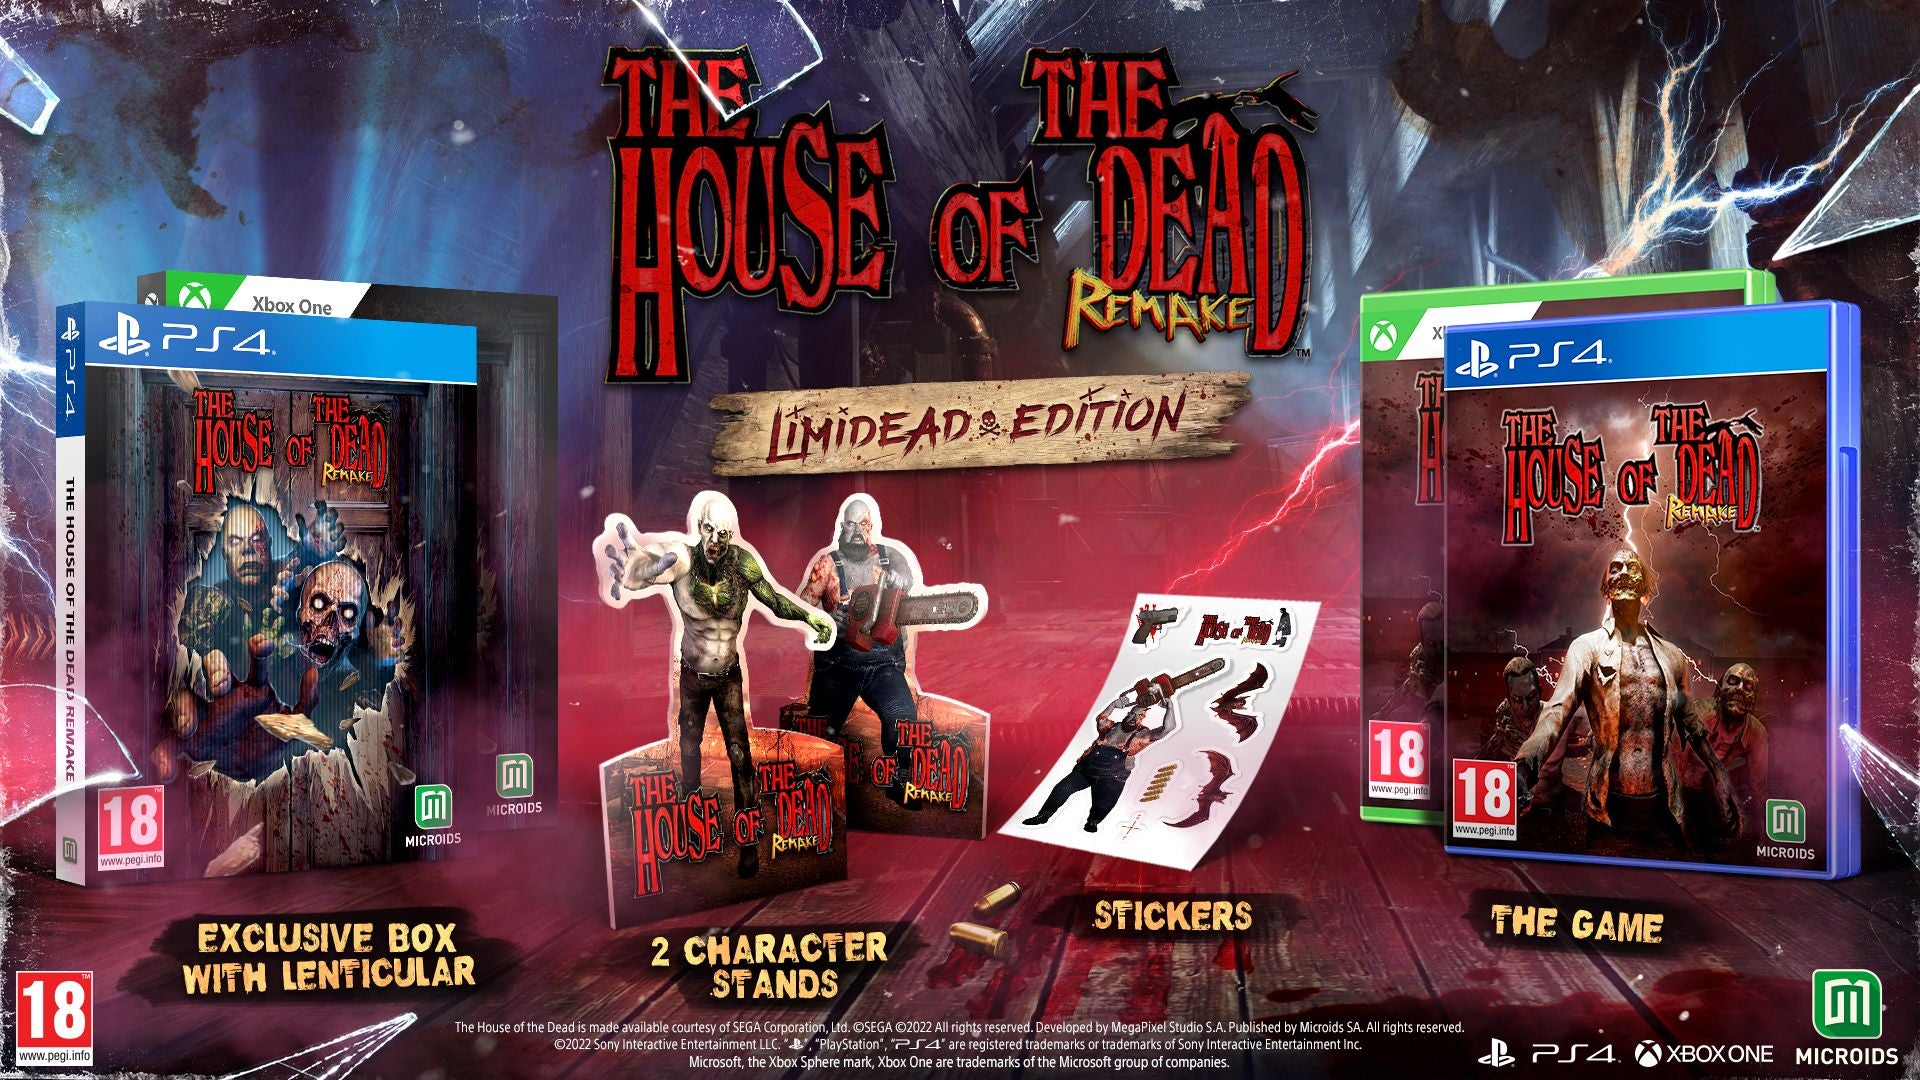 The House of the Dead: Remake “Limidead Edition” sekarang tersedia di PS4